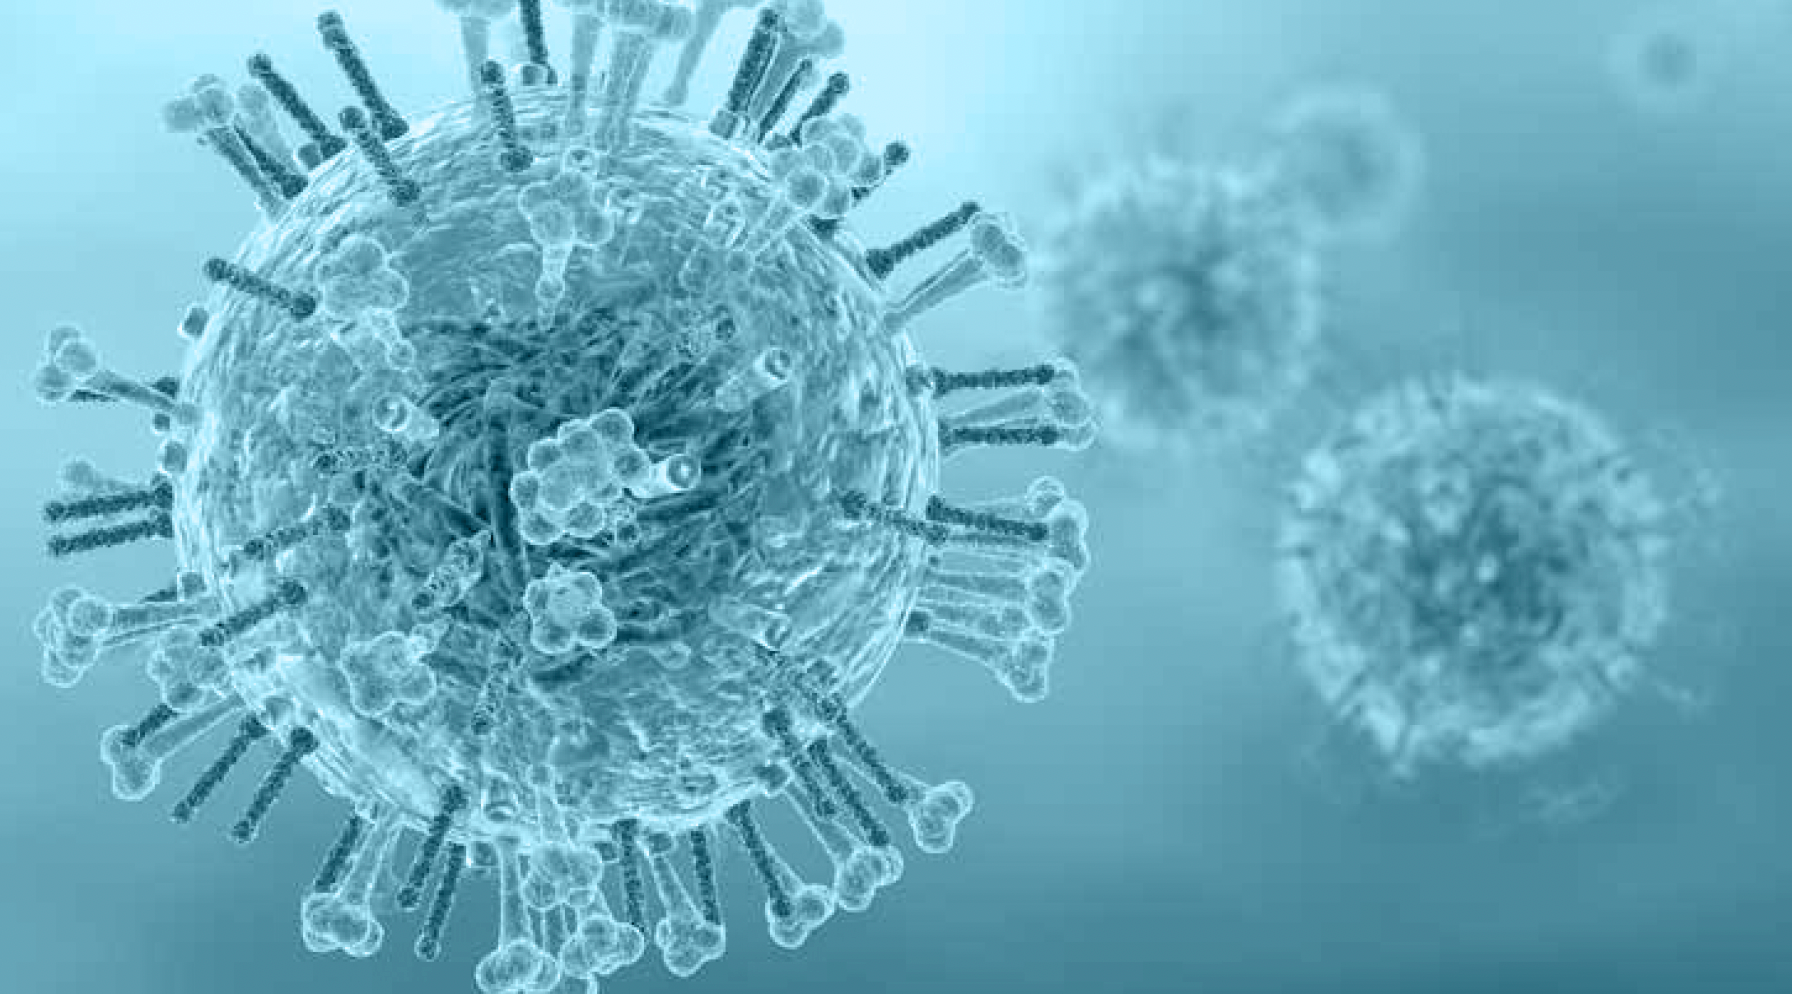 Influenza Virus Is Primed for Continual Emergence and Pandemic Potential